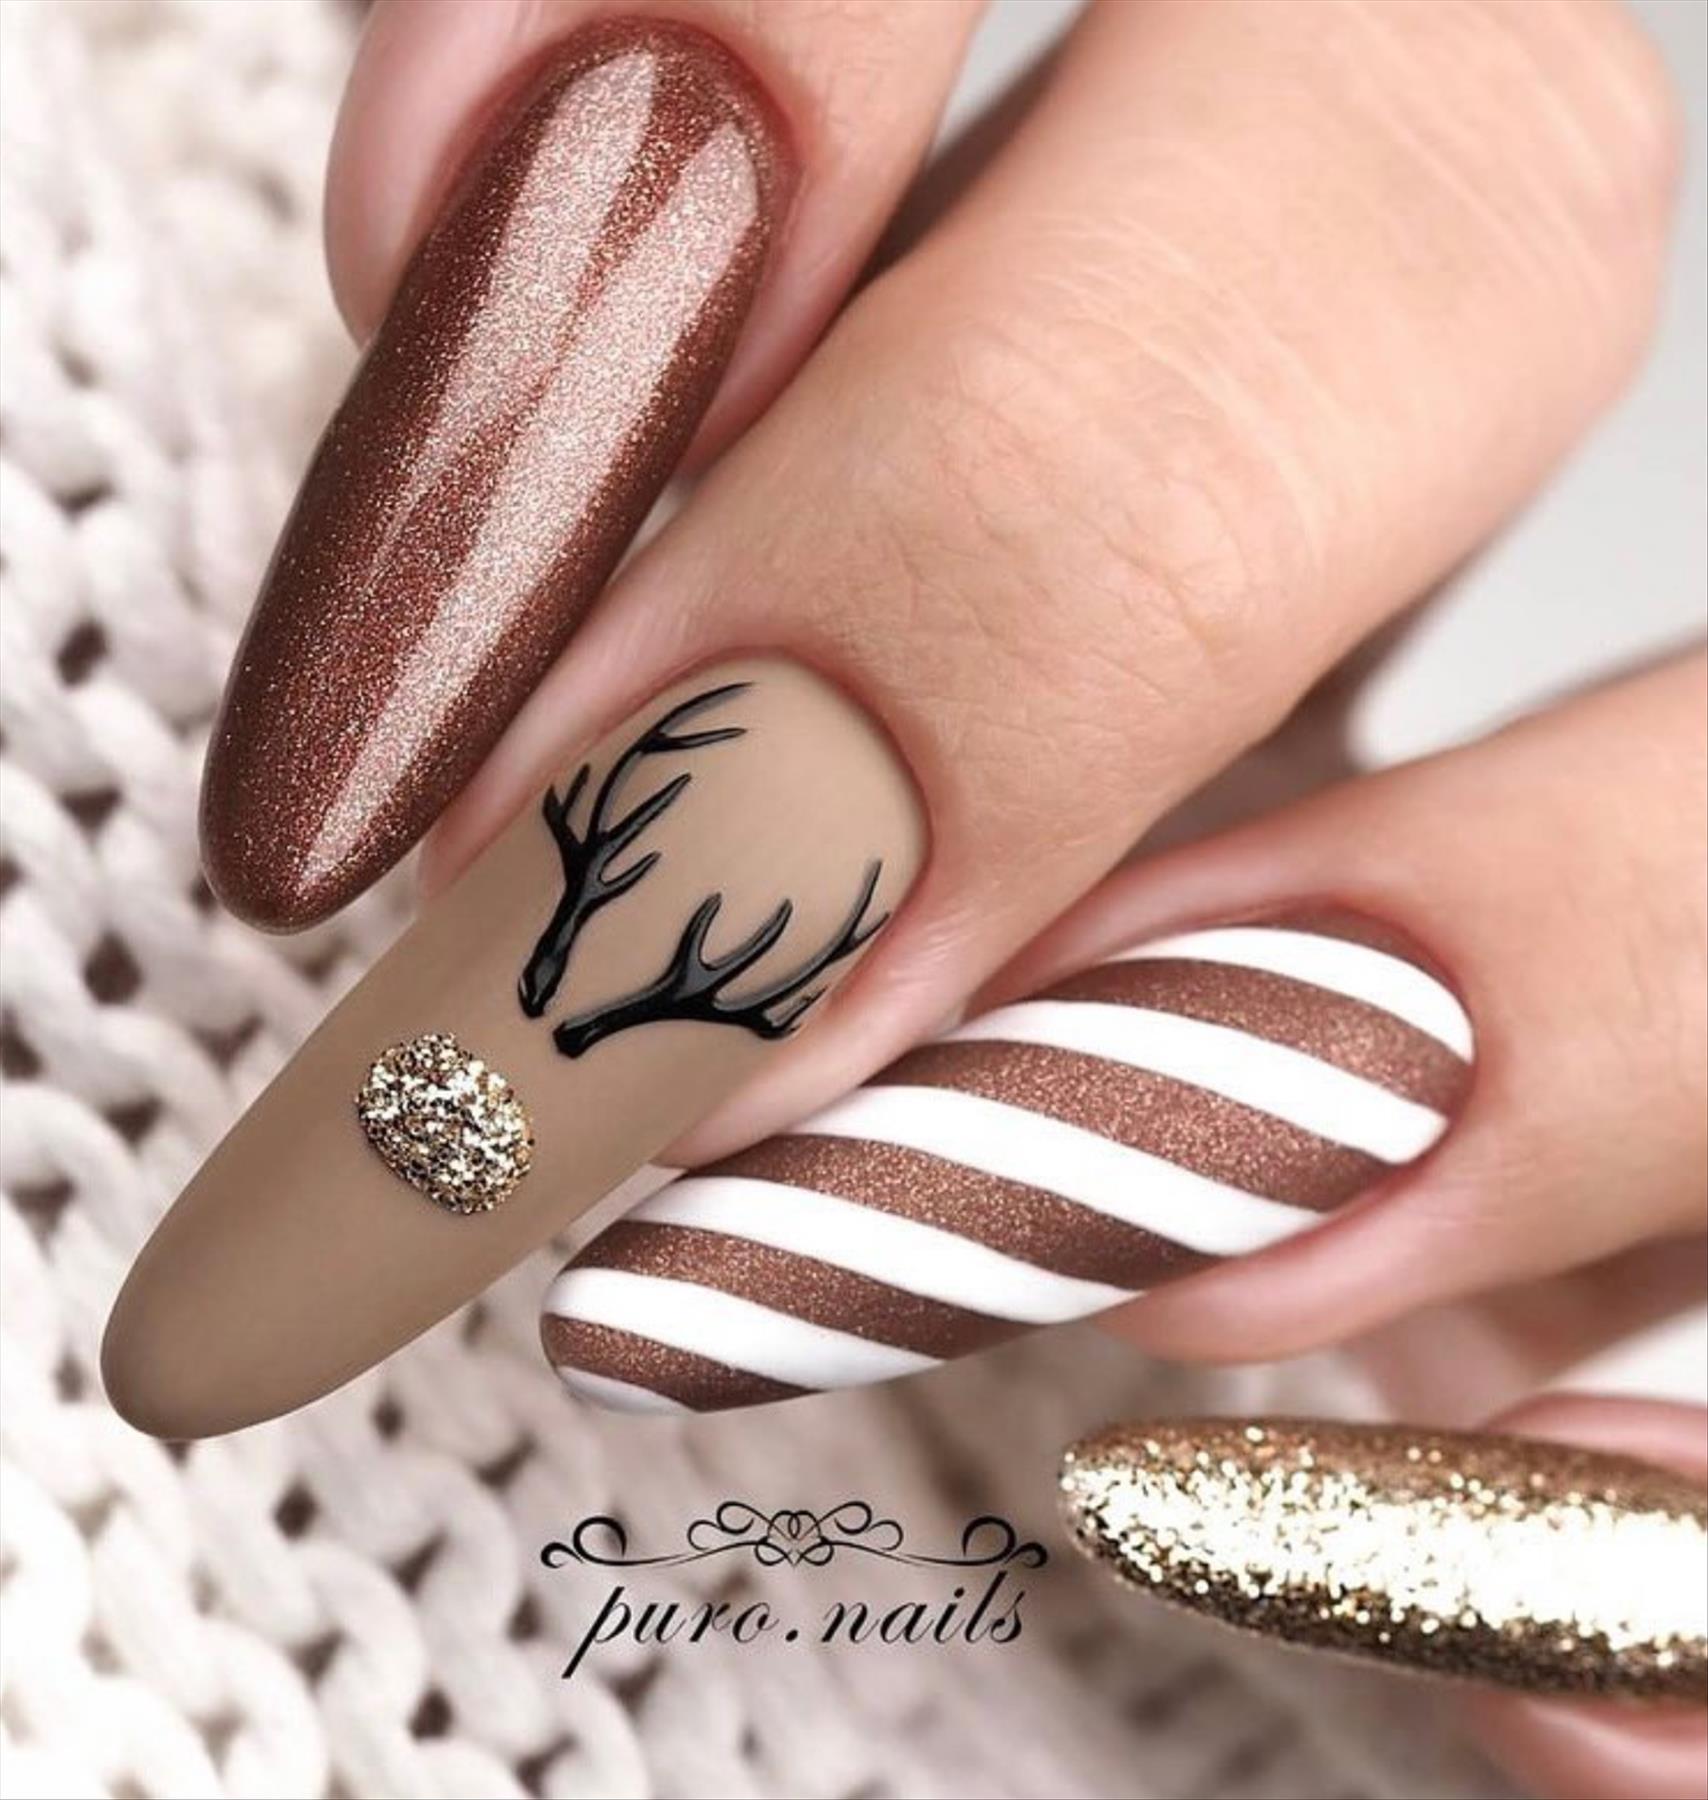 Best Christmas nail design ideas 2021 to try